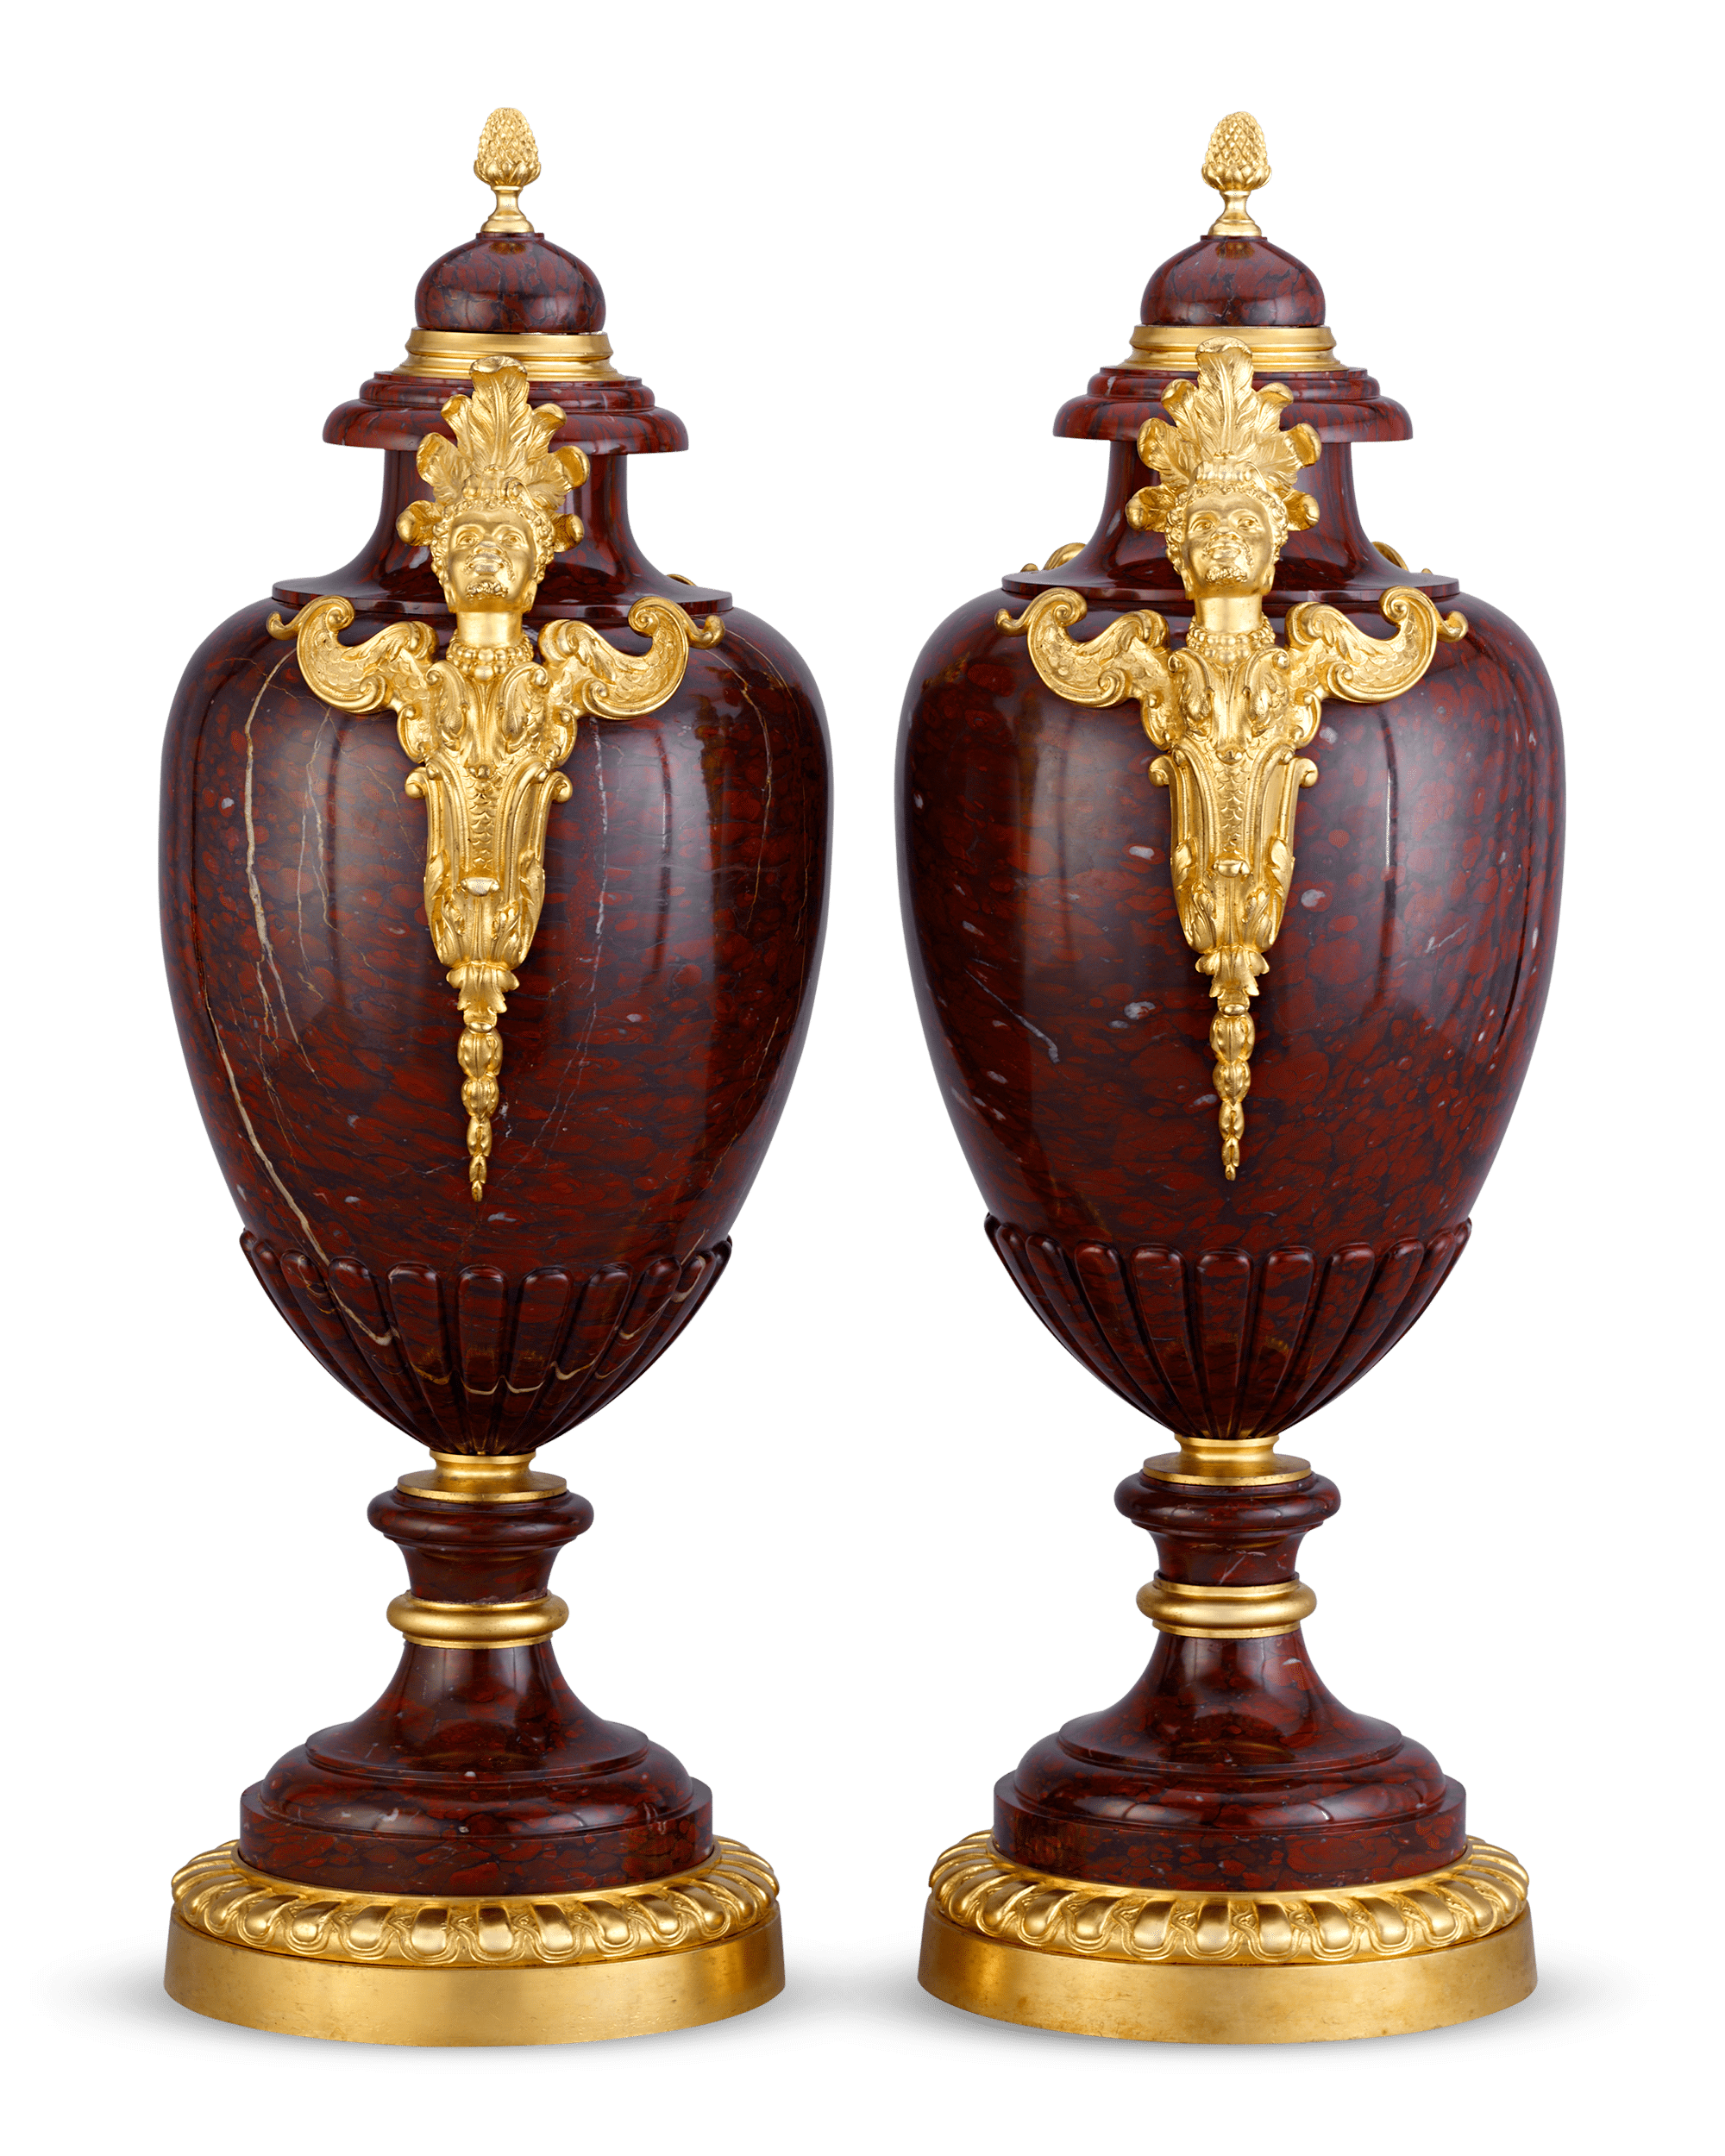 Griotte Rouge Vases attributed to Charles-Henri-Joseph Cordier